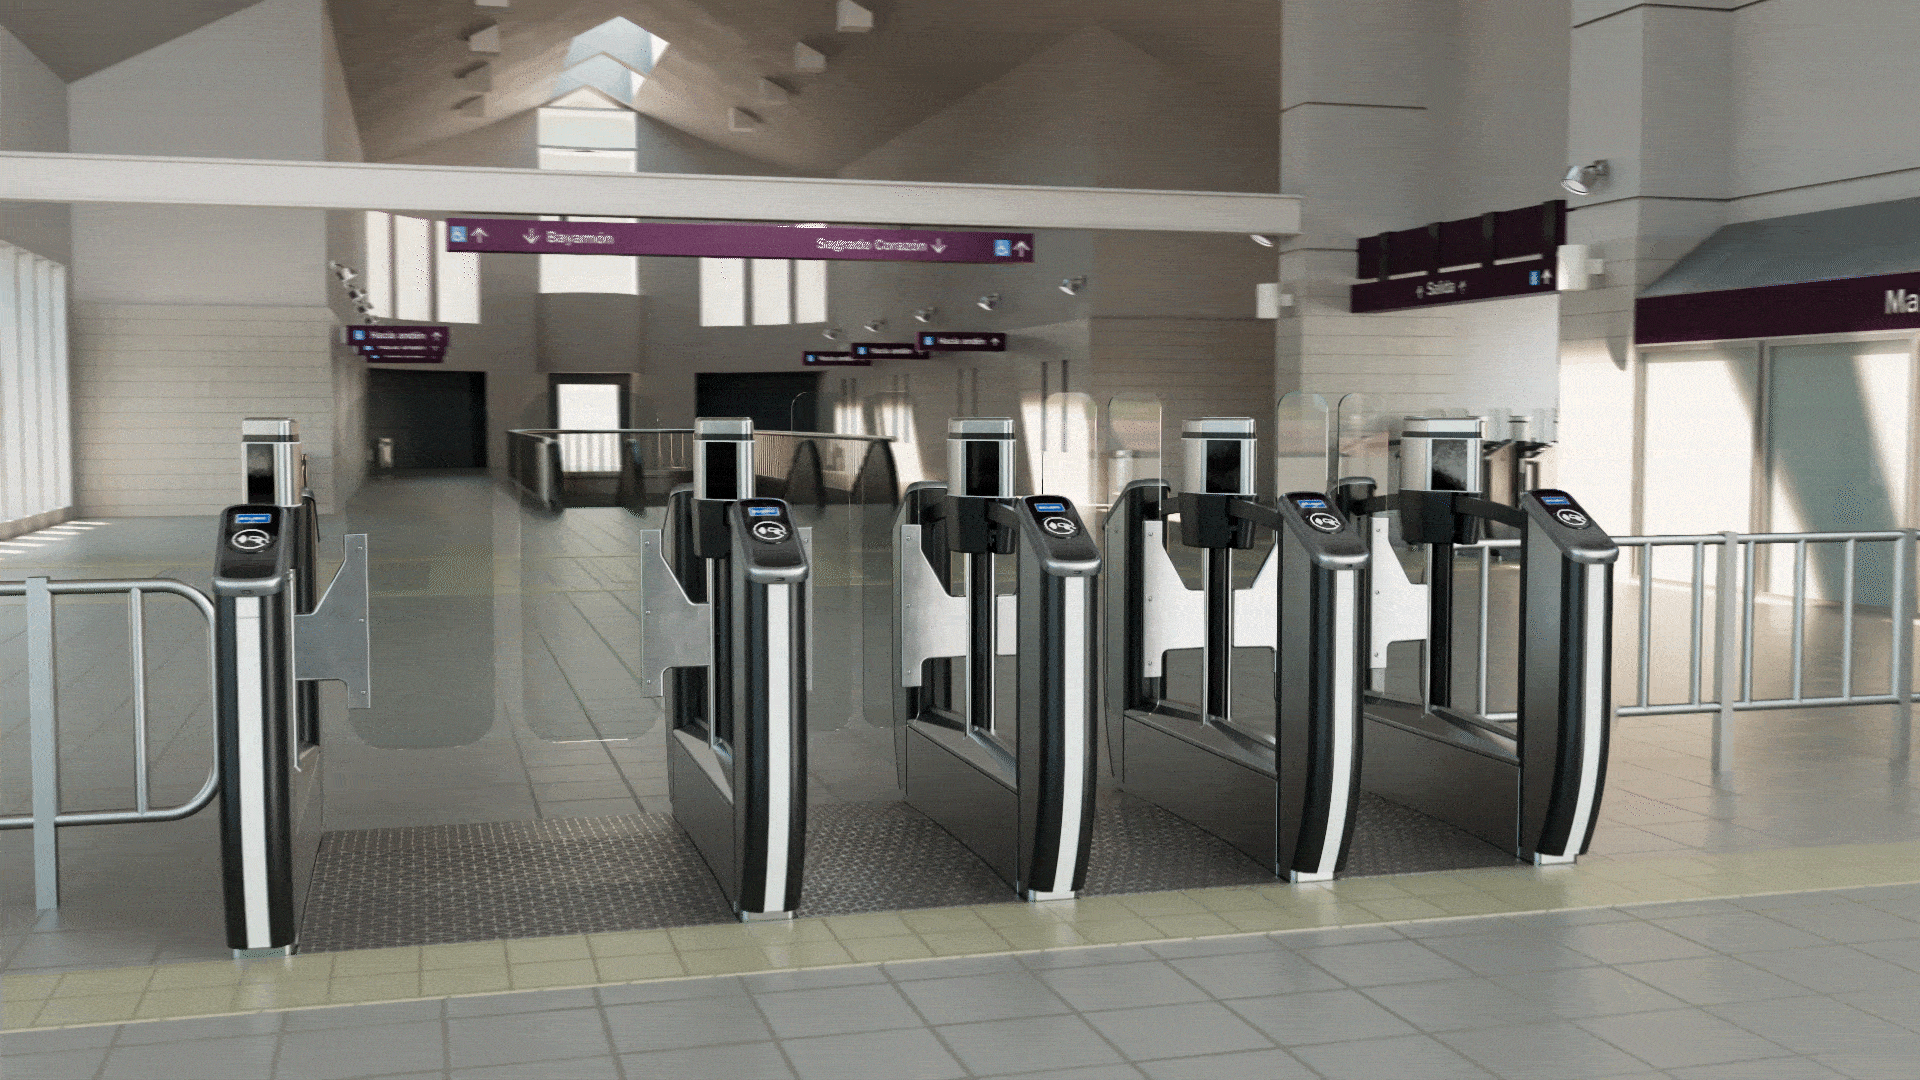 3D animation of train station ticketing